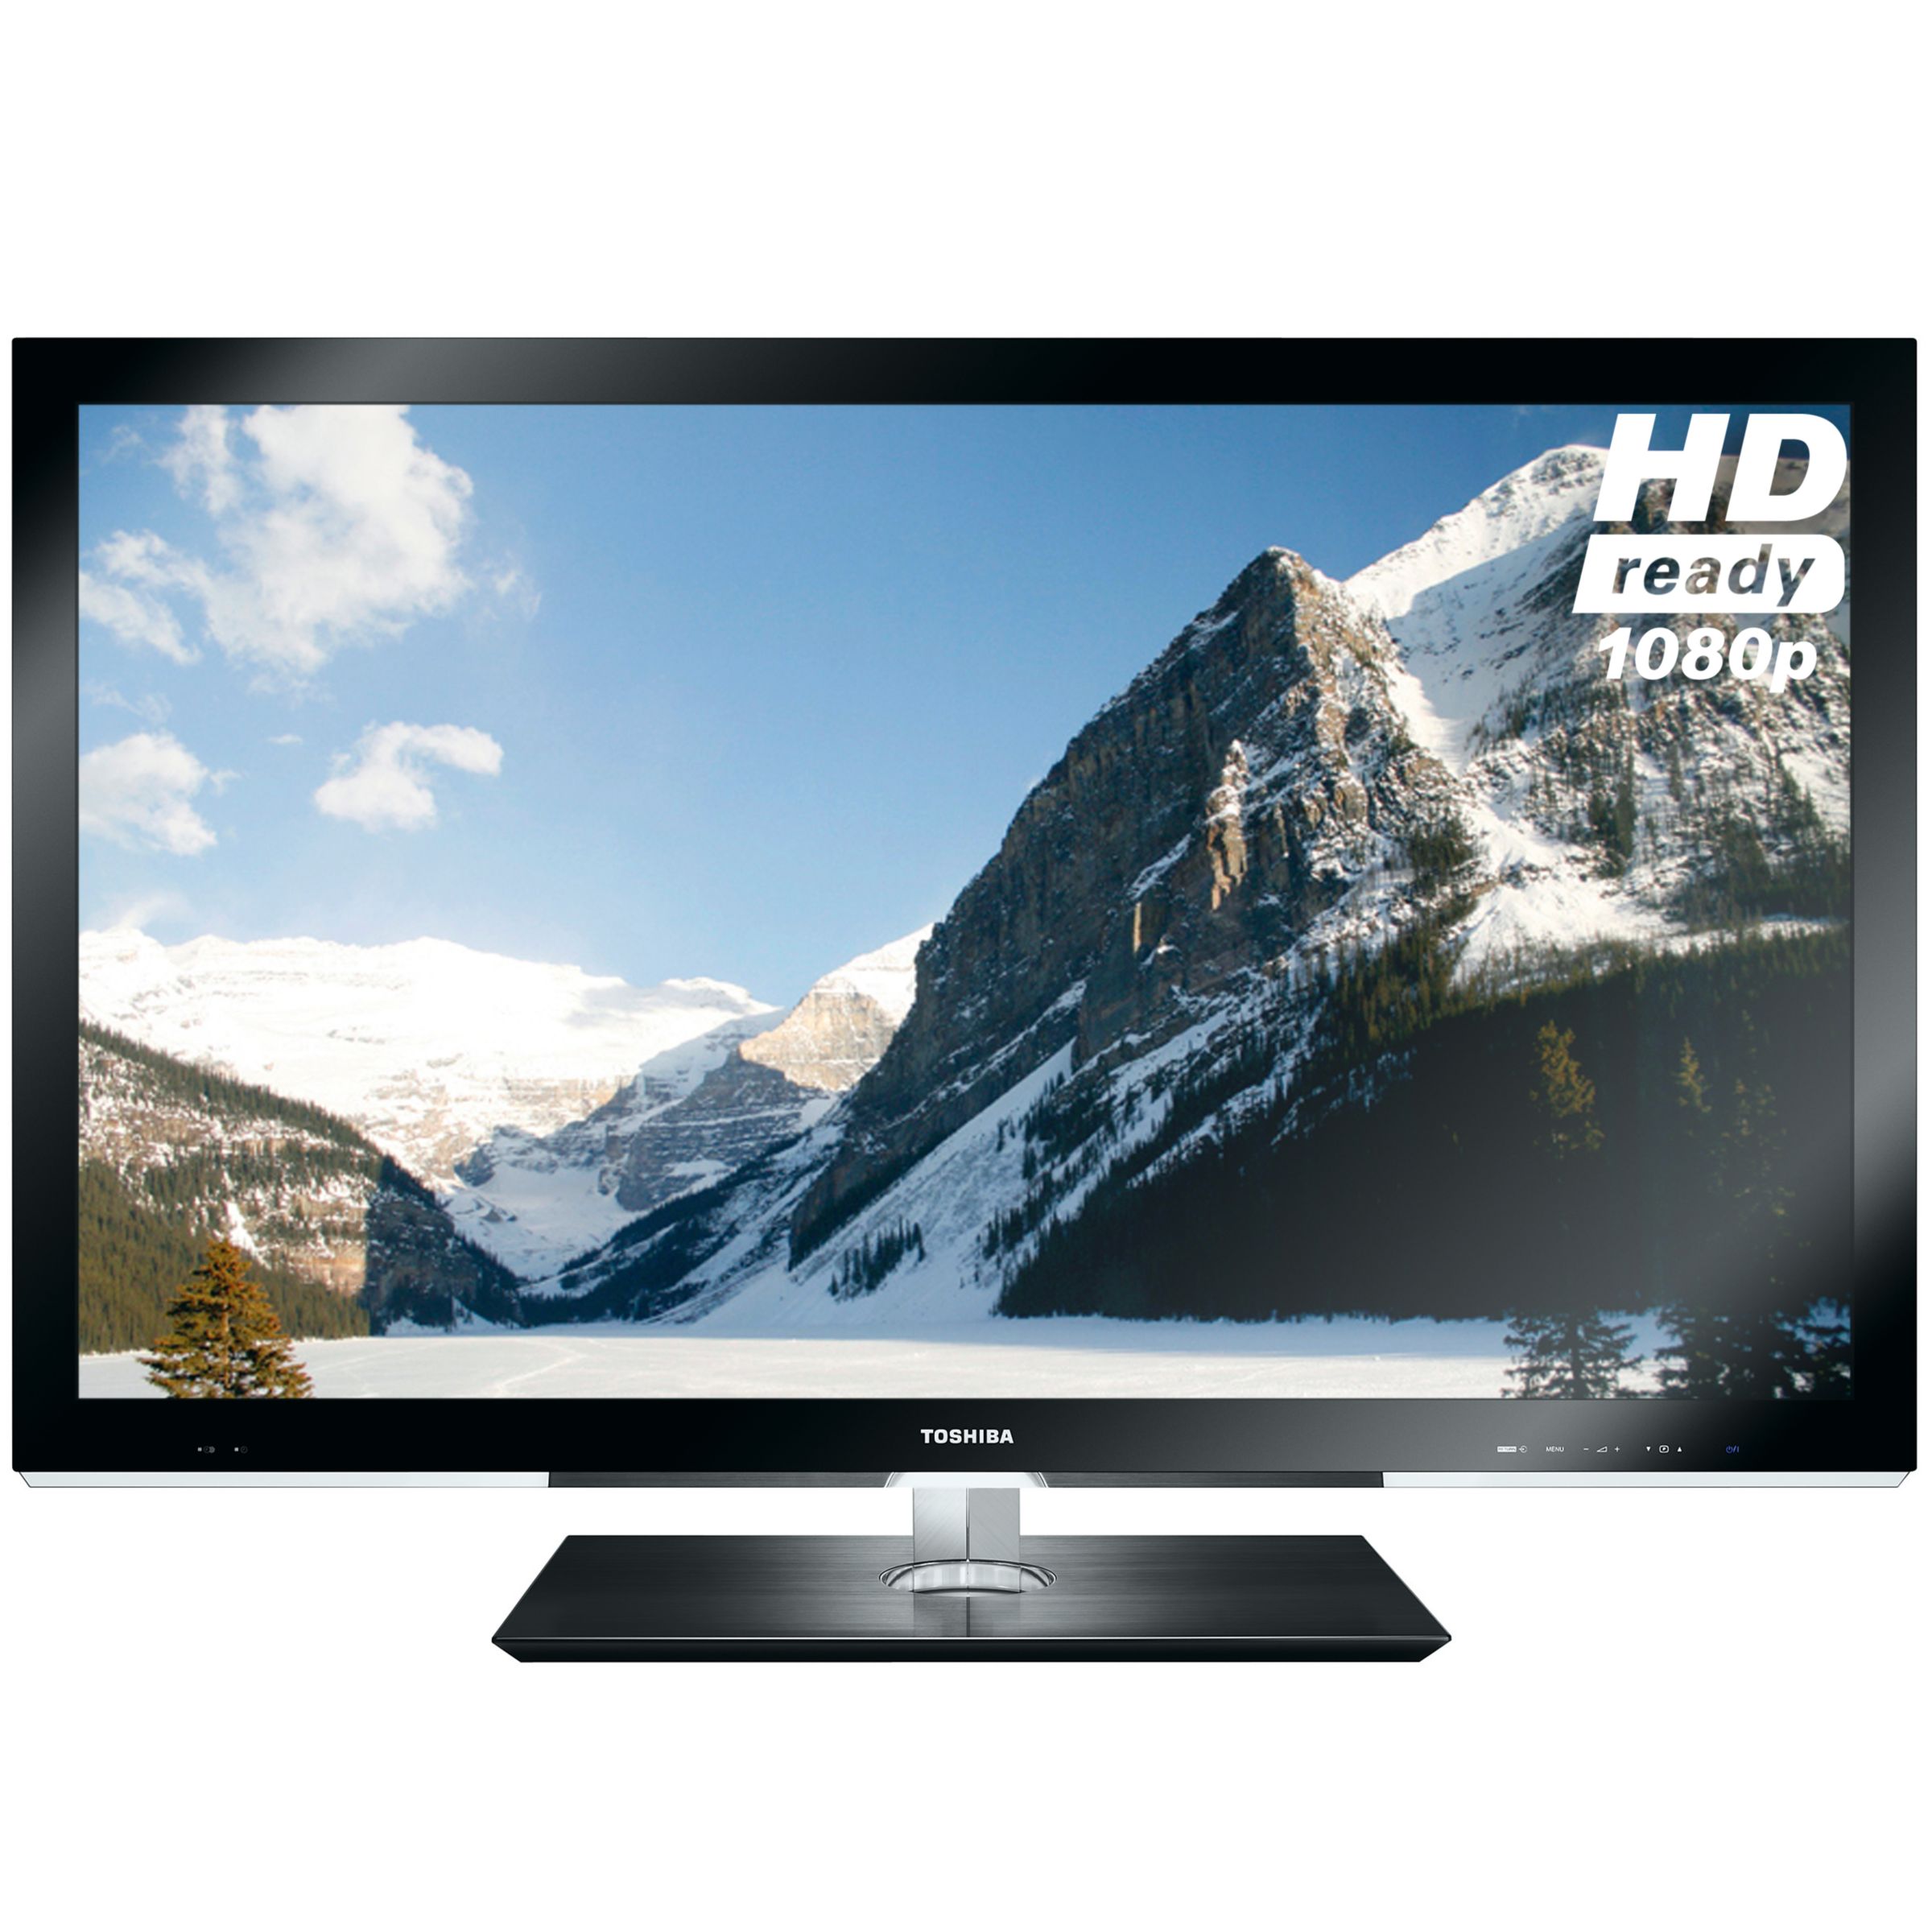 Toshiba Regza 40WL768 LED HD 1080p 3D Ready Television, 40 Inch with Built-in Freeview HD at John Lewis